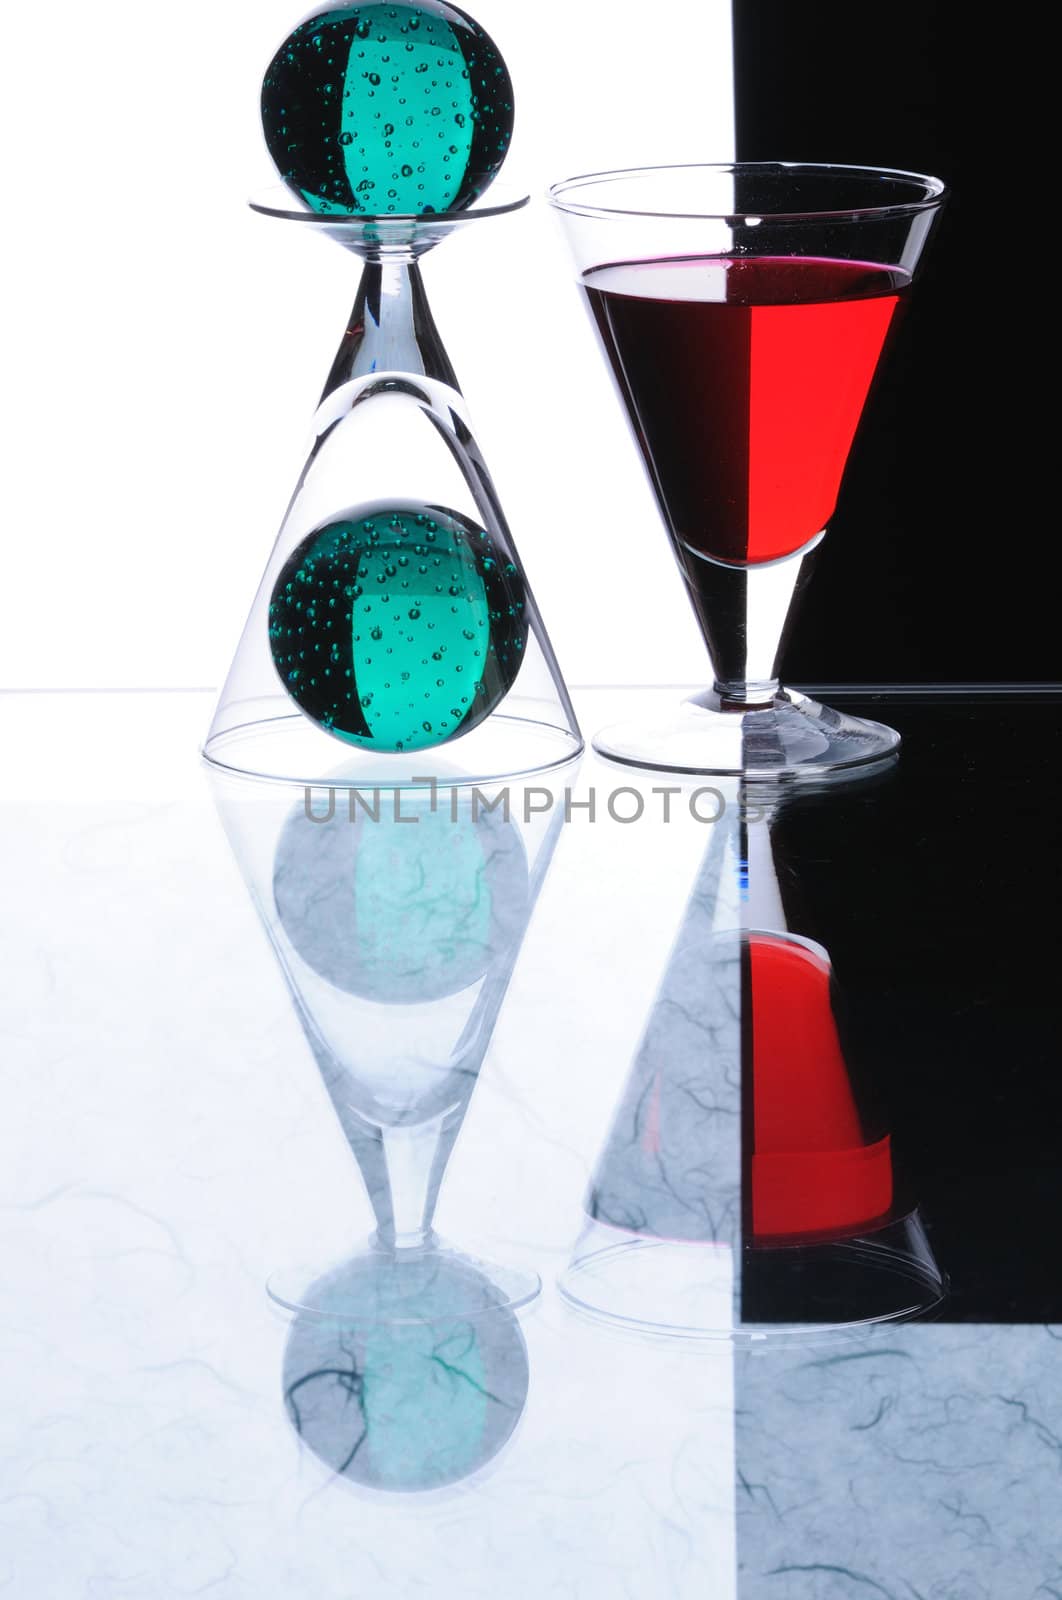 wineglasses and spheres isolated on white and black background